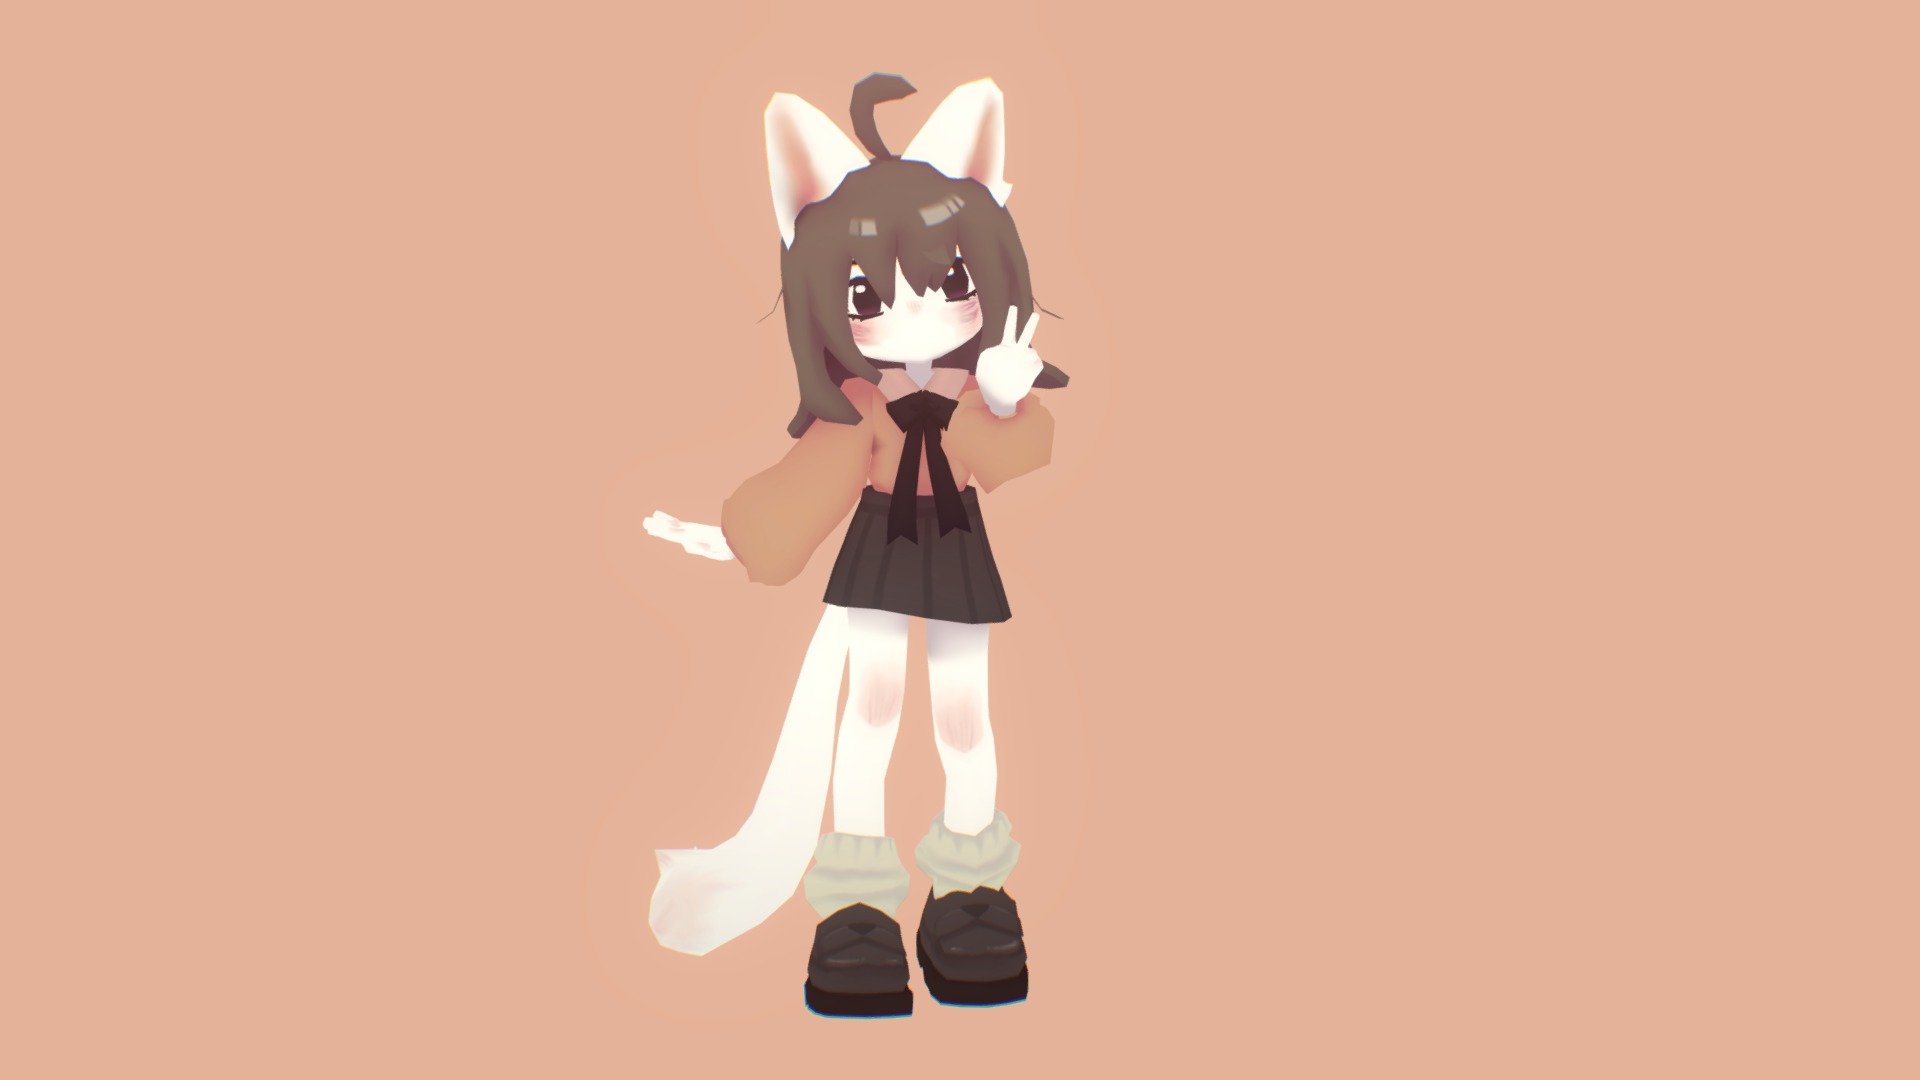 First ever model I made using Blender!

Game/VRC ready low poly character 

2d concept by me : 
Software Used :  Substance Painter / Blender / CSP - Chewy the Cat (VRC ready) - 3D model by chewziyue 3d model